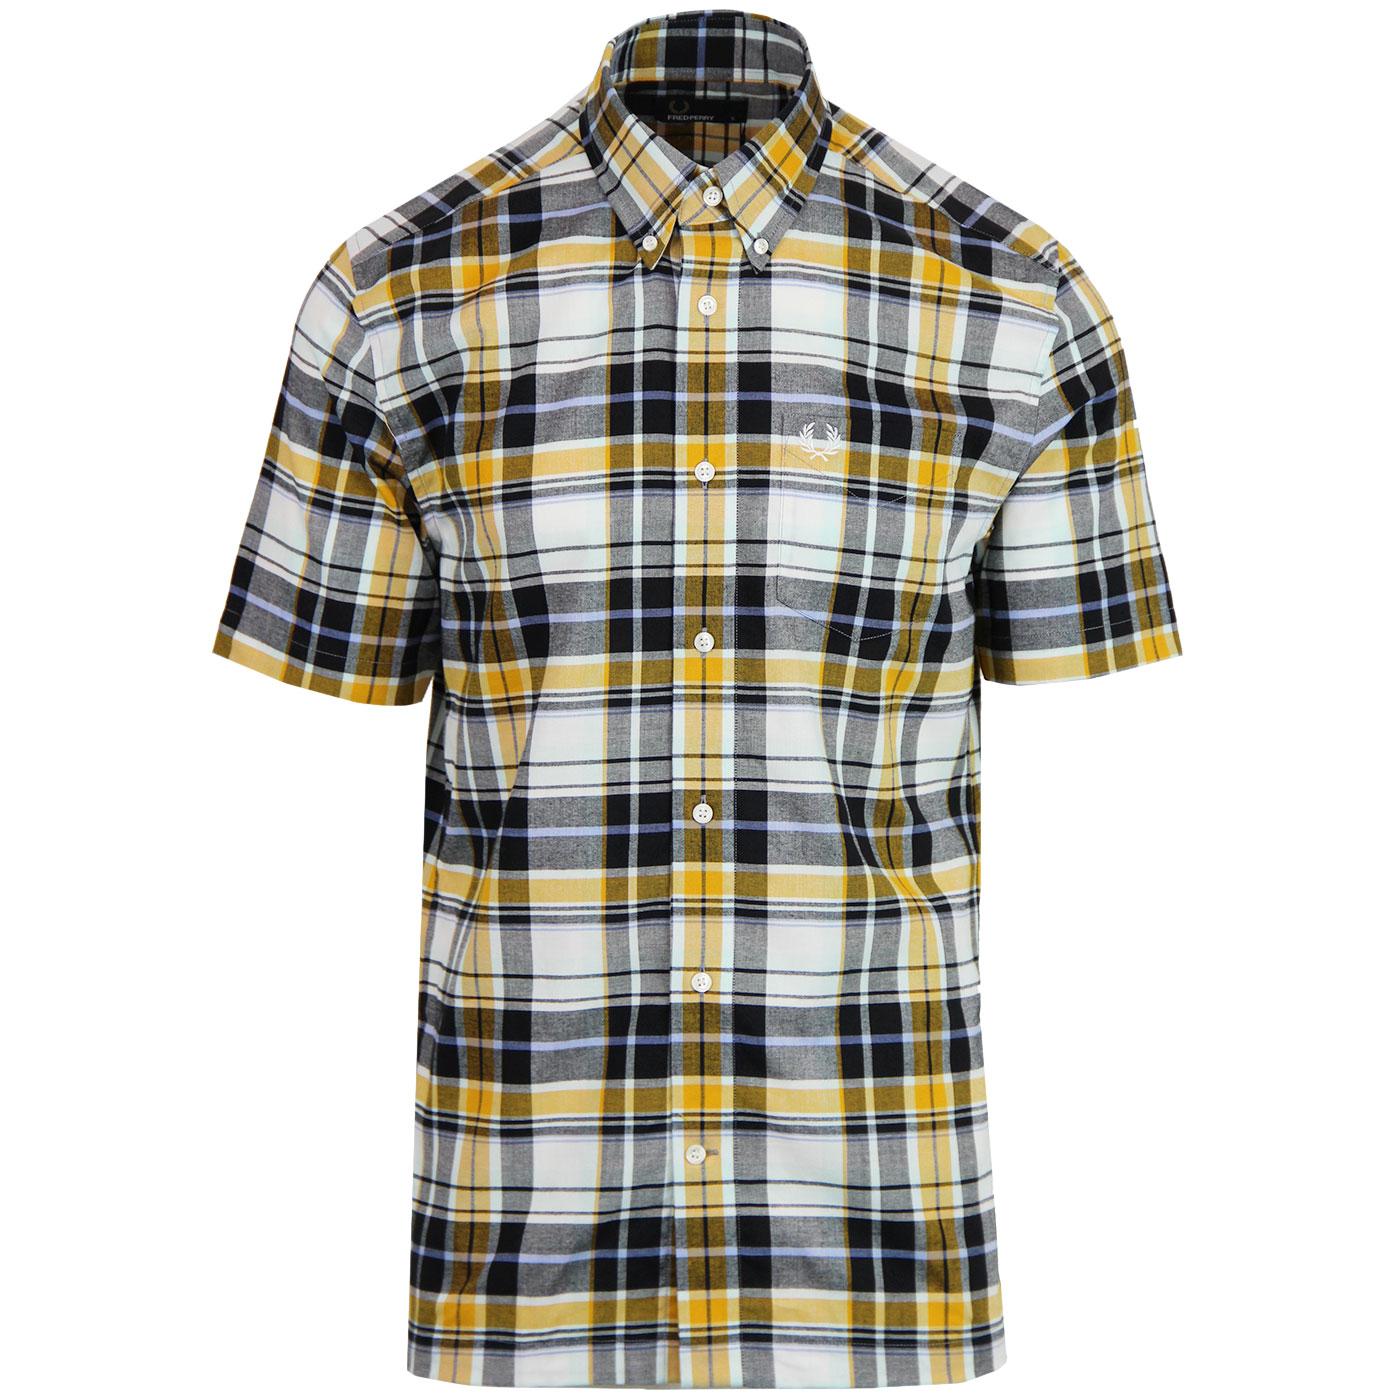 FRED PERRY S/S Retro Mod Madras Check Shirt in Peanut